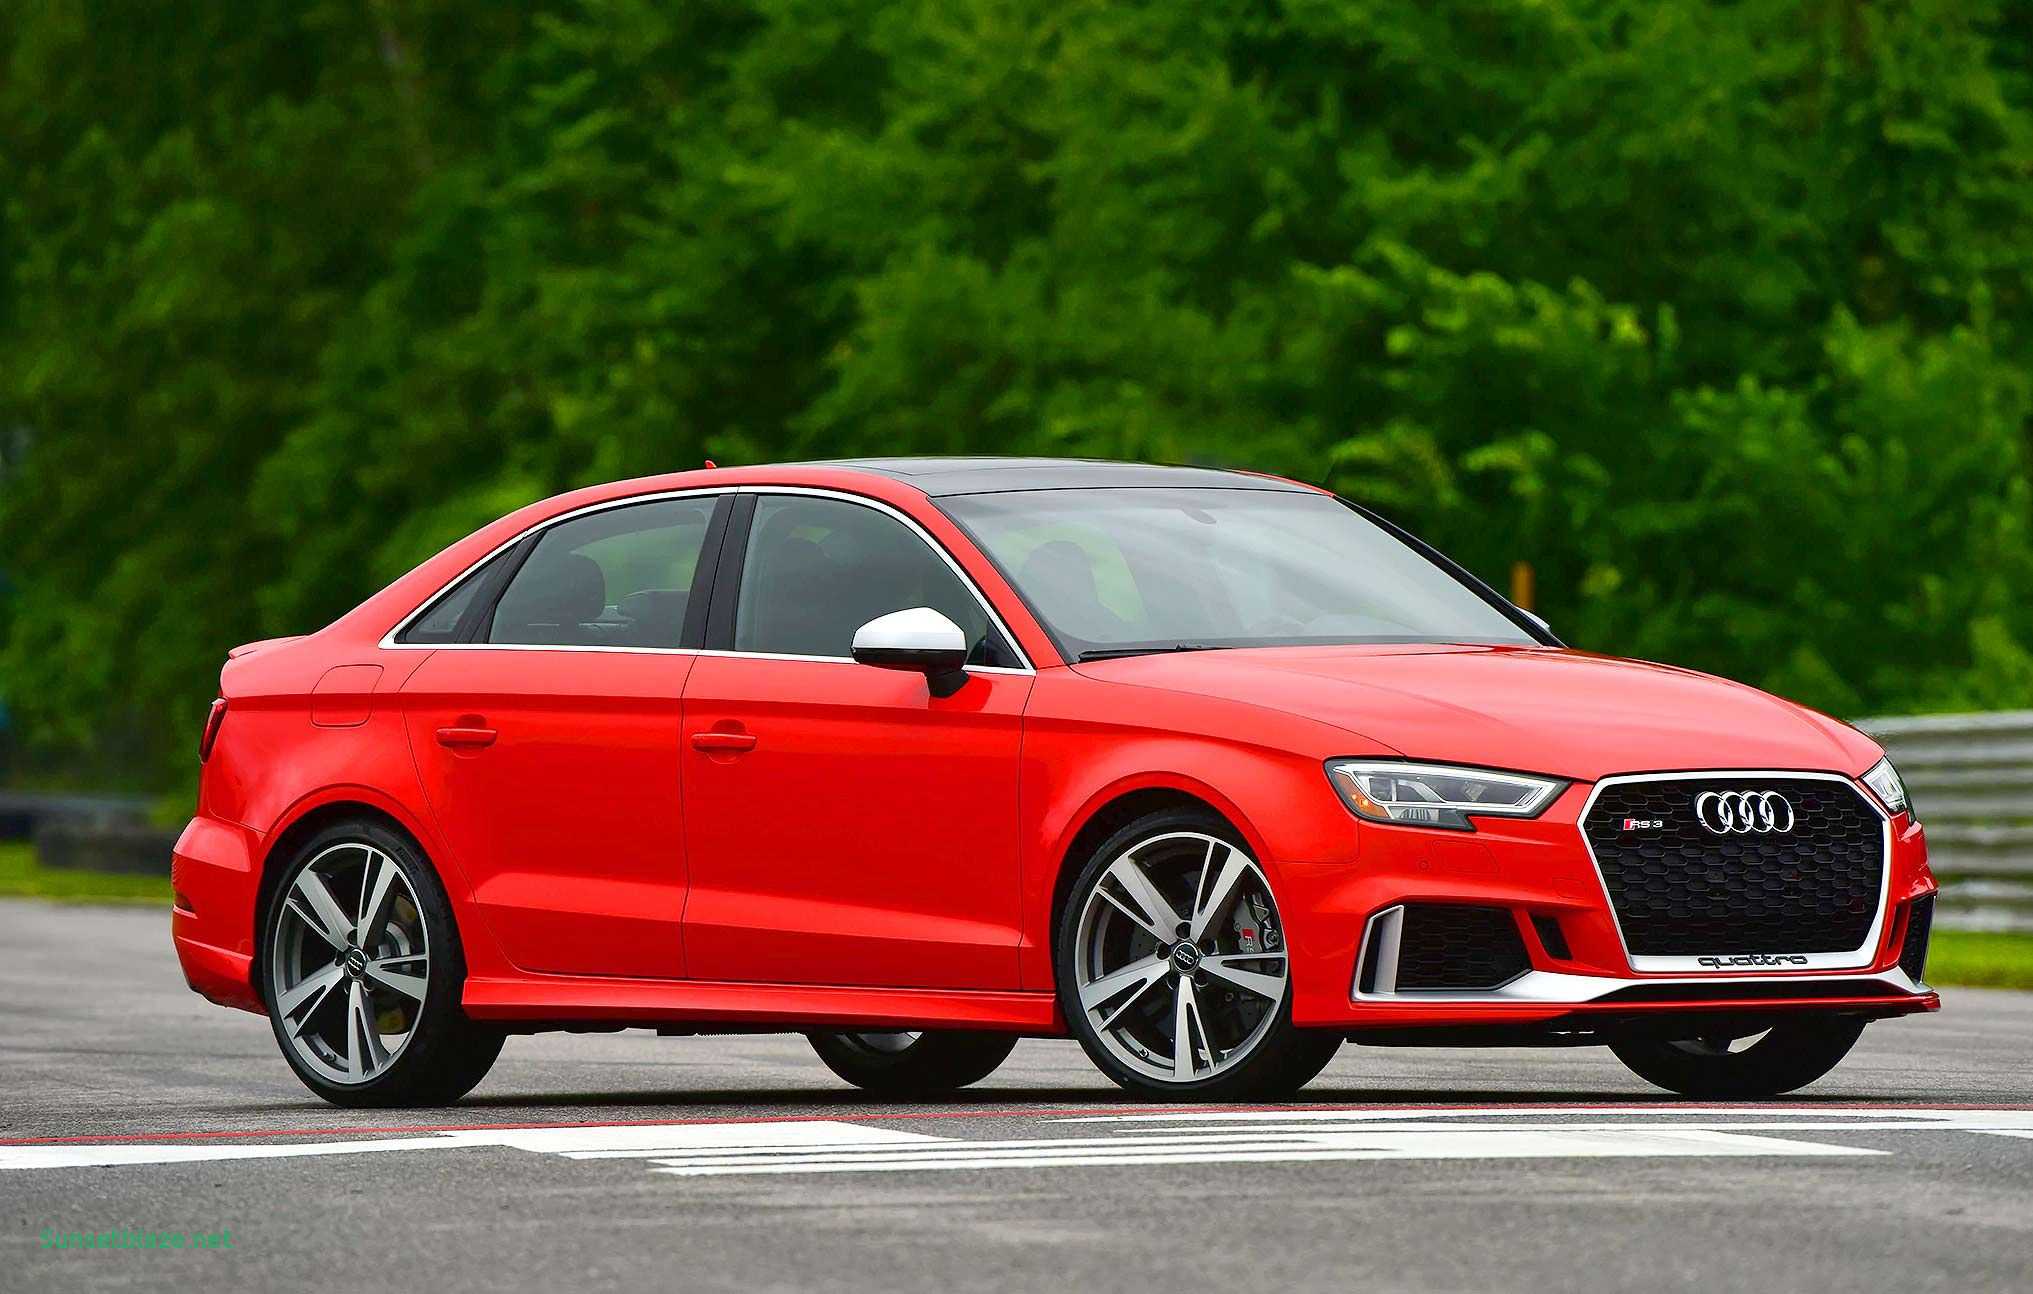 Audi Rs3 Engine Specs and Performance Audi Rs3 New Of 2019 Audi